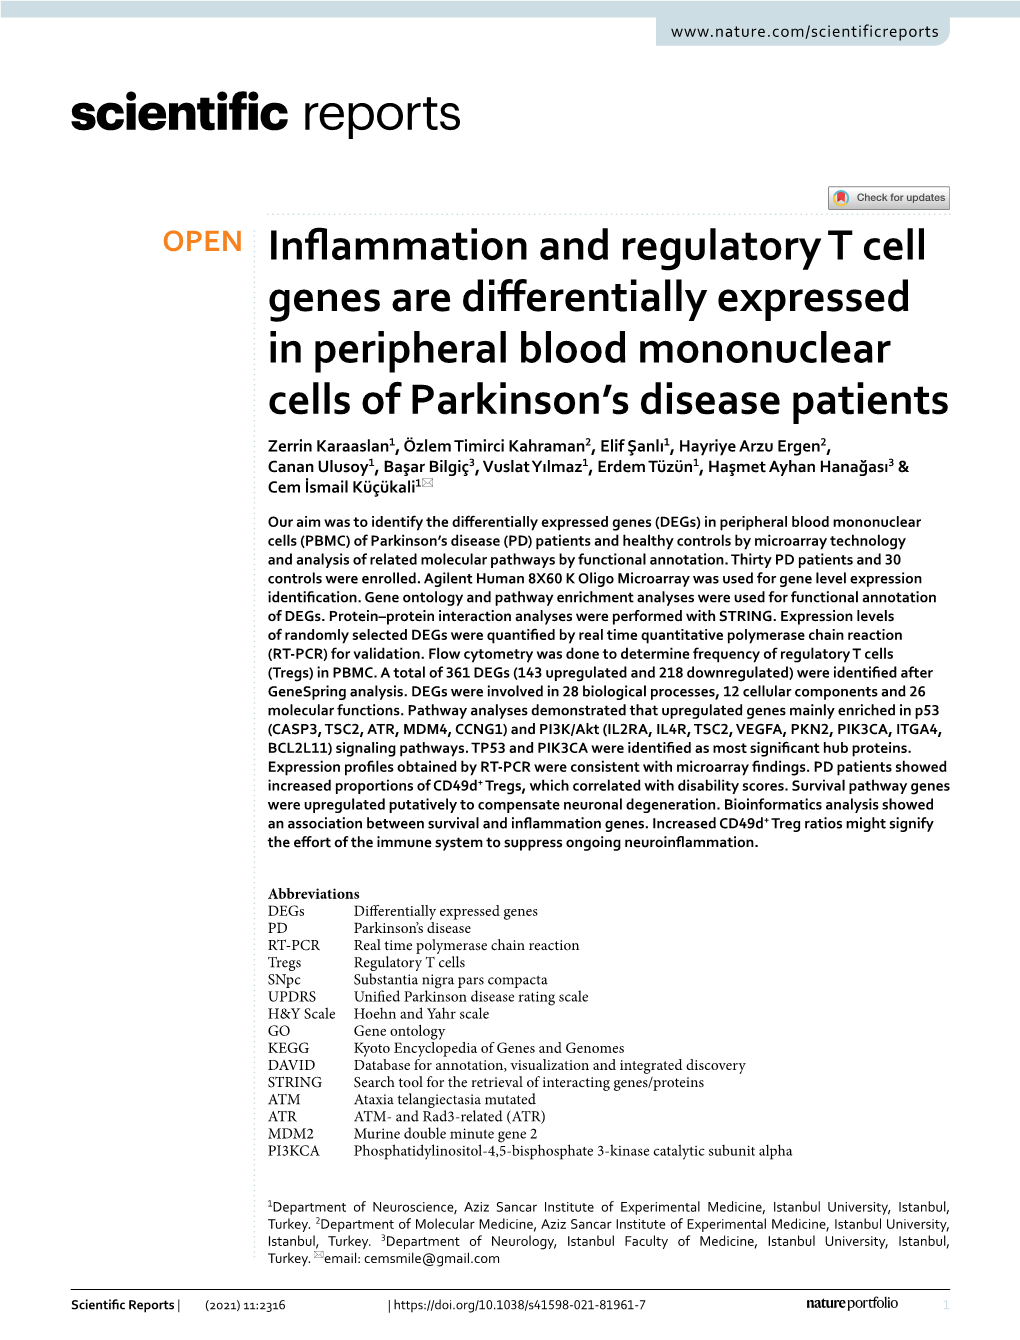 Inflammation and Regulatory T Cell Genes Are Differentially Expressed in Peripheral Blood Mononuclear Cells of Parkinson's